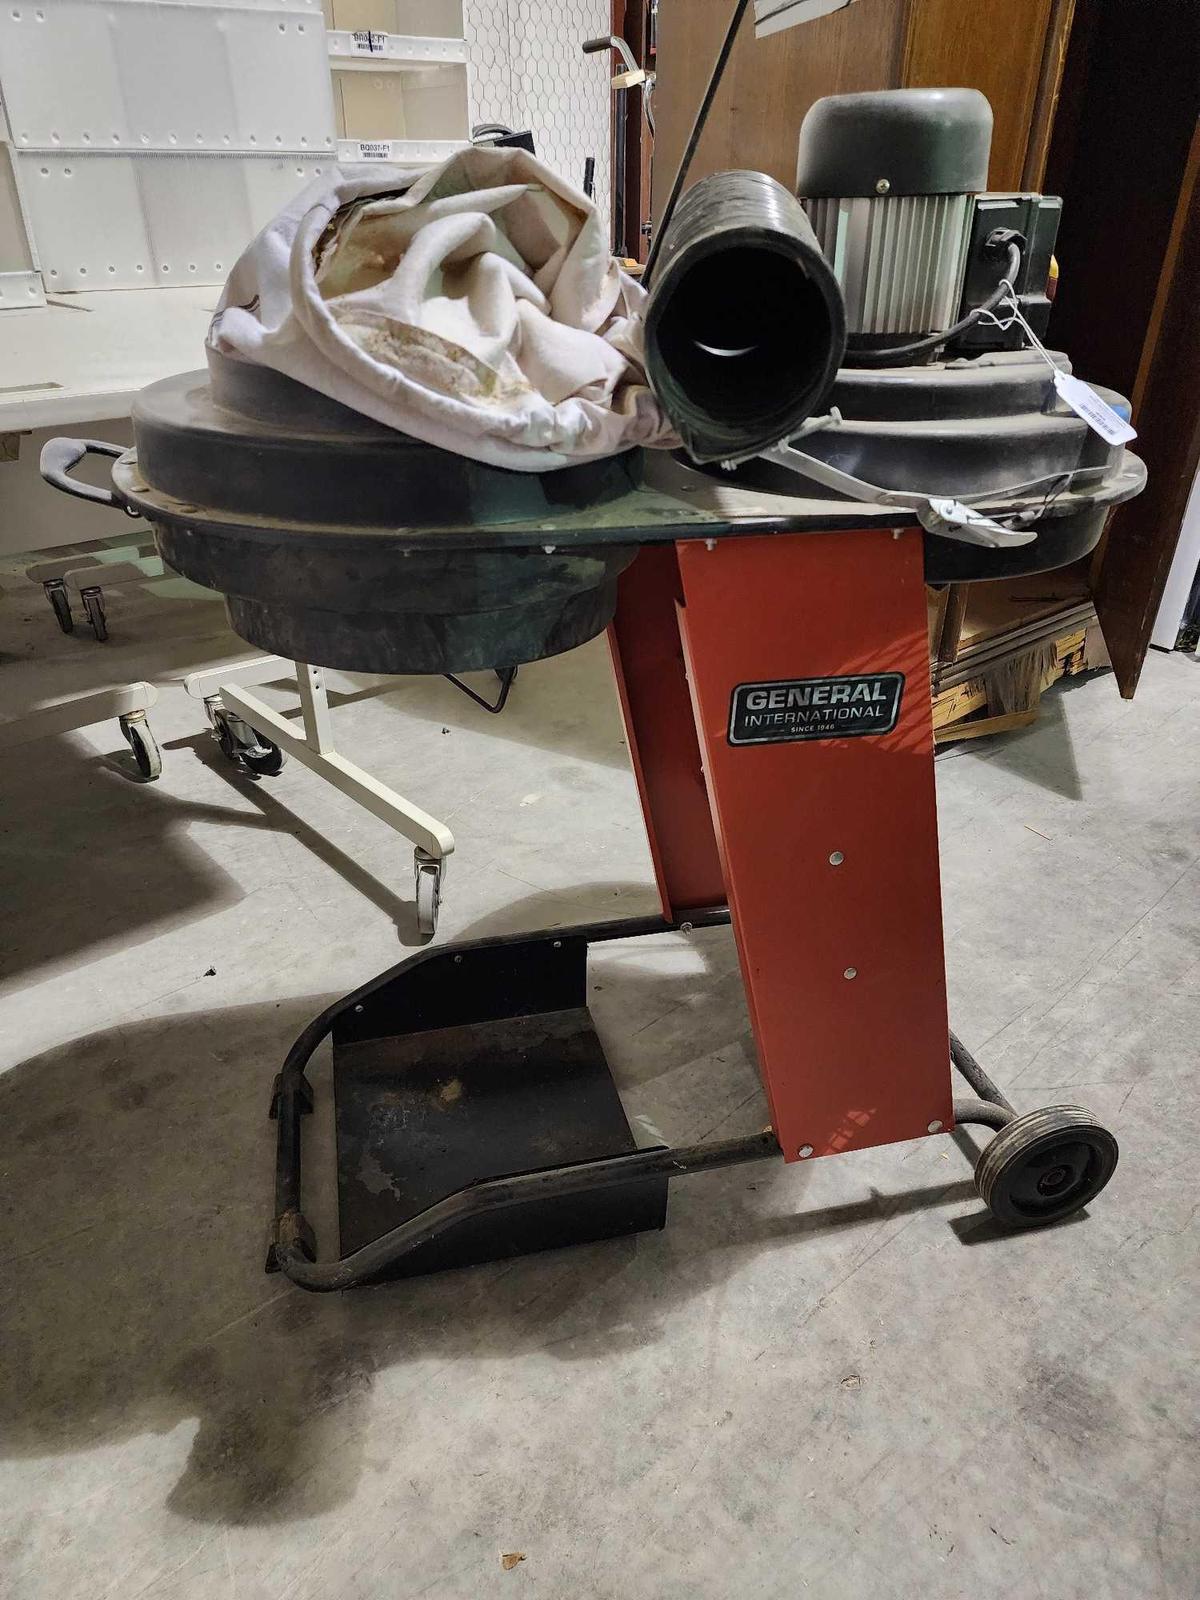 Electric saw dust catcher on wheeled cart with bag. Used.